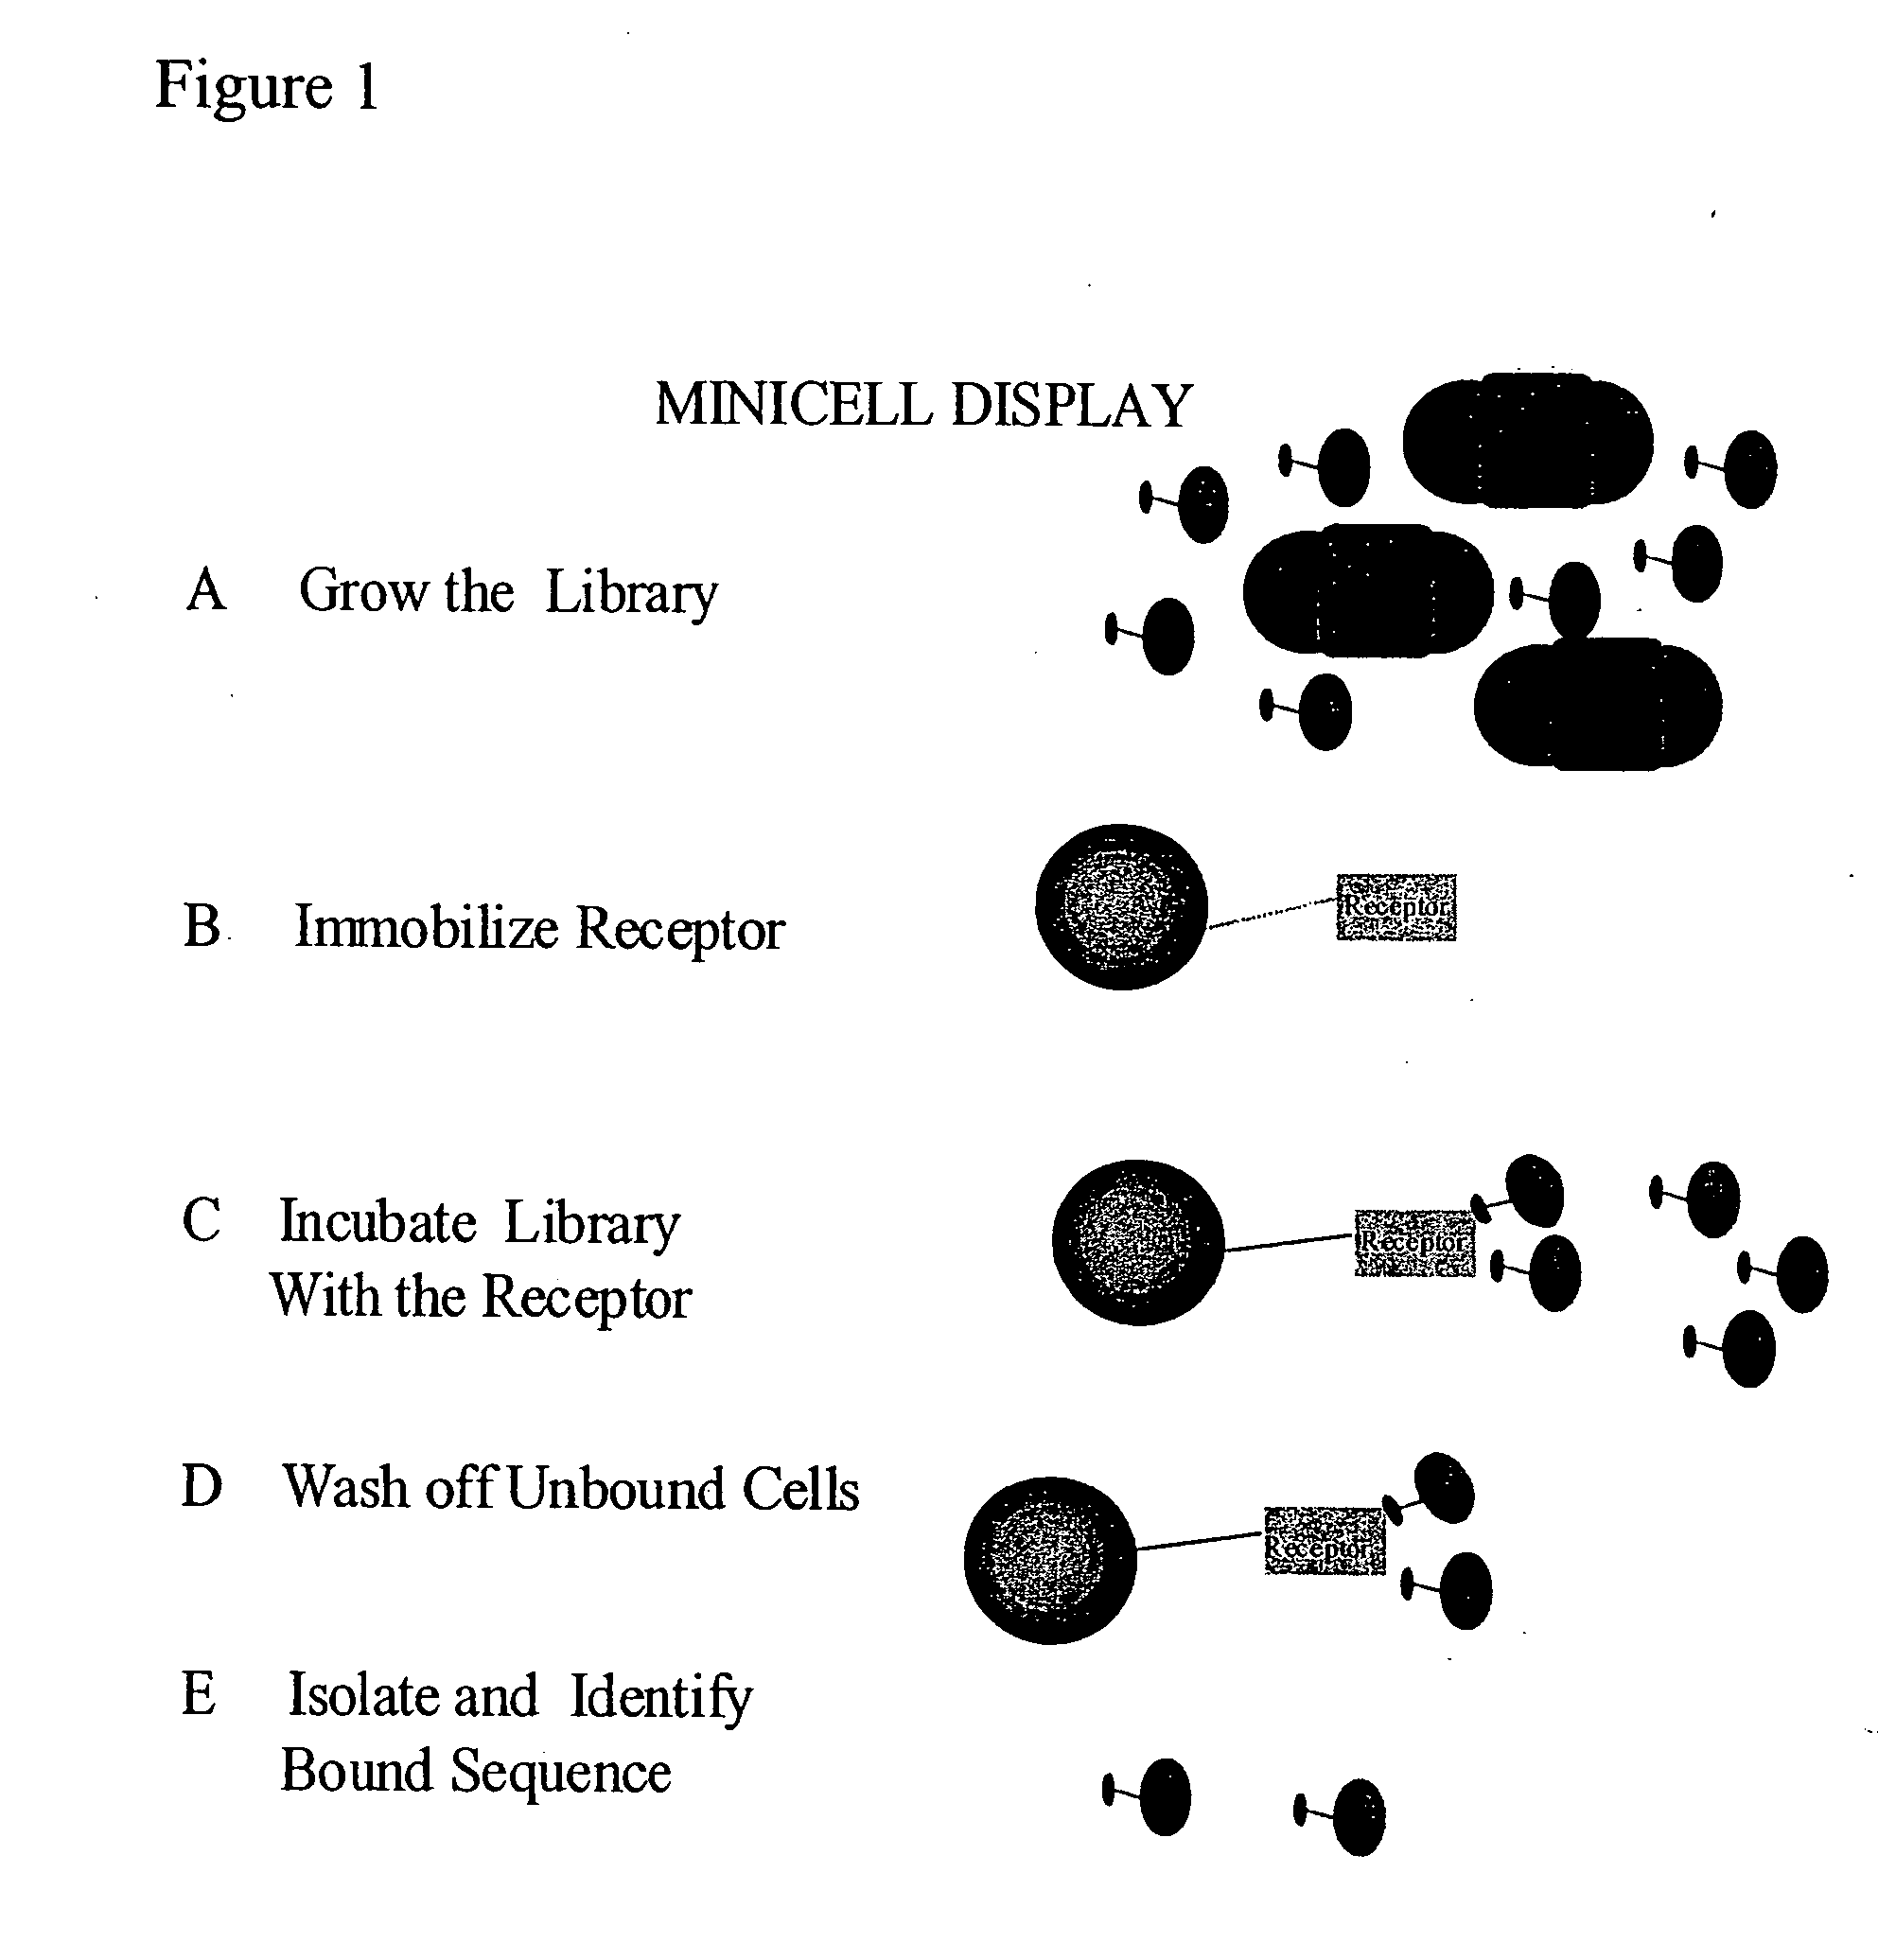 Methods to screen peptide display libraries using minicell display